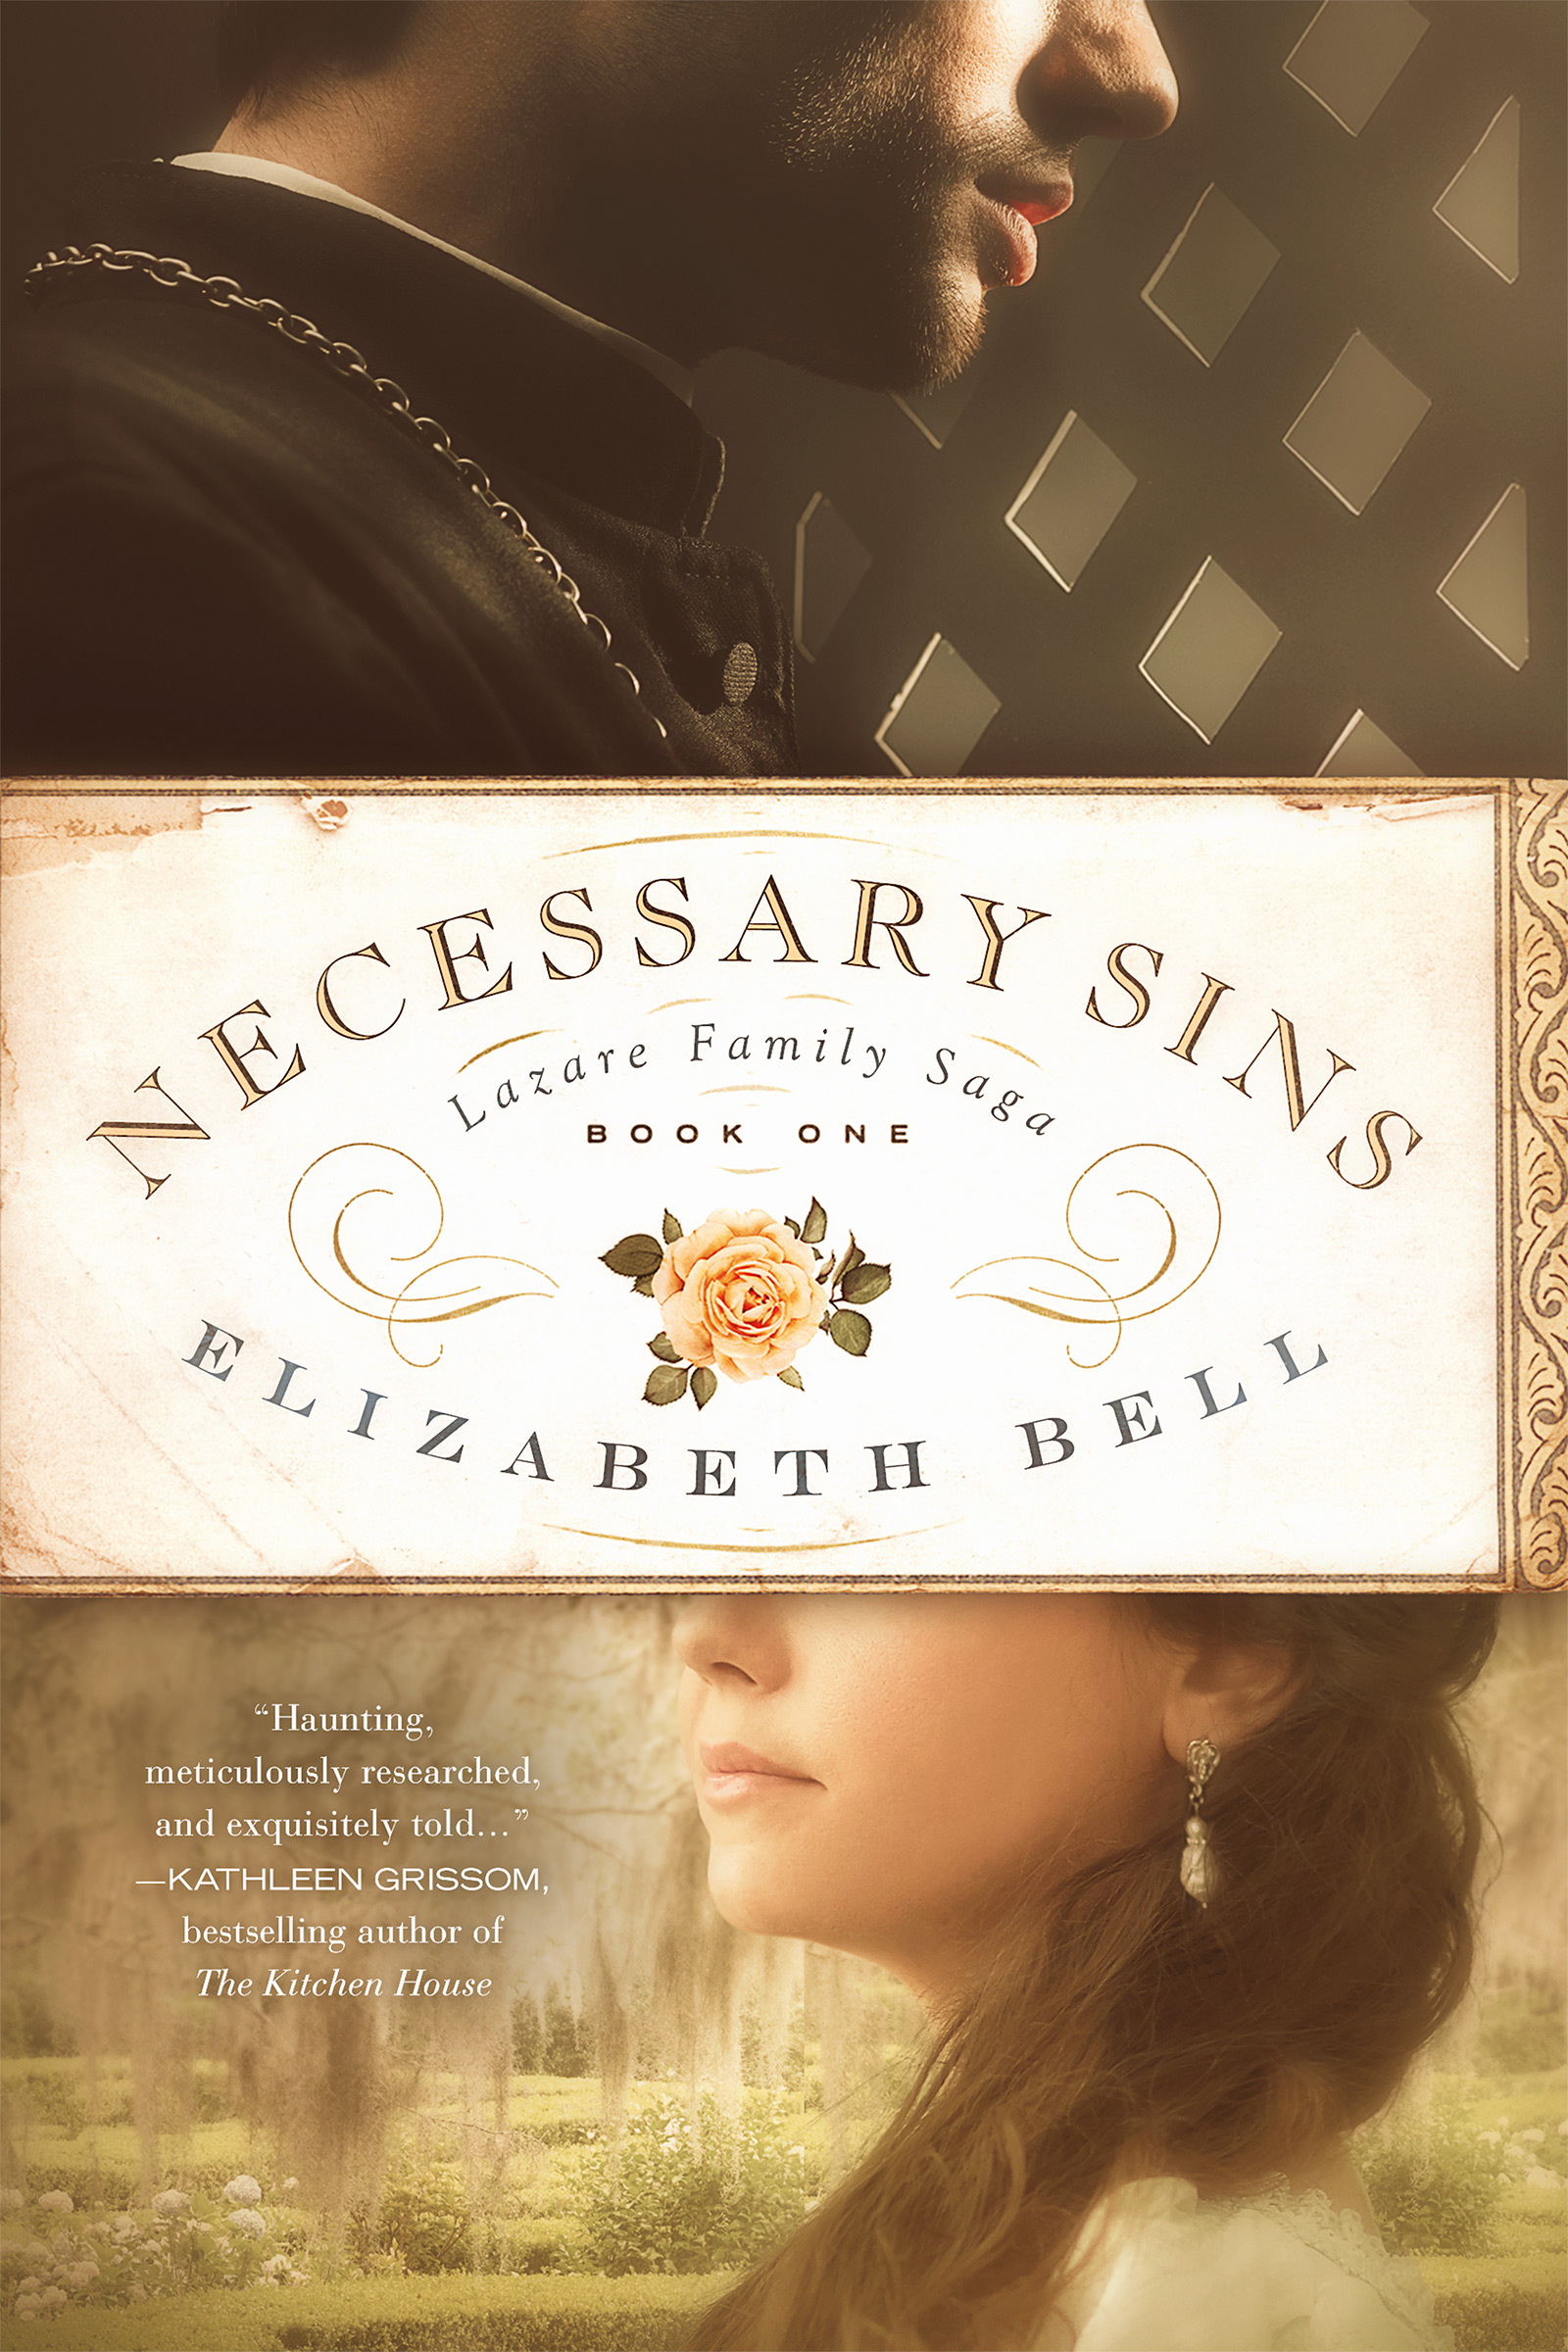 New cover of Necessary Sins